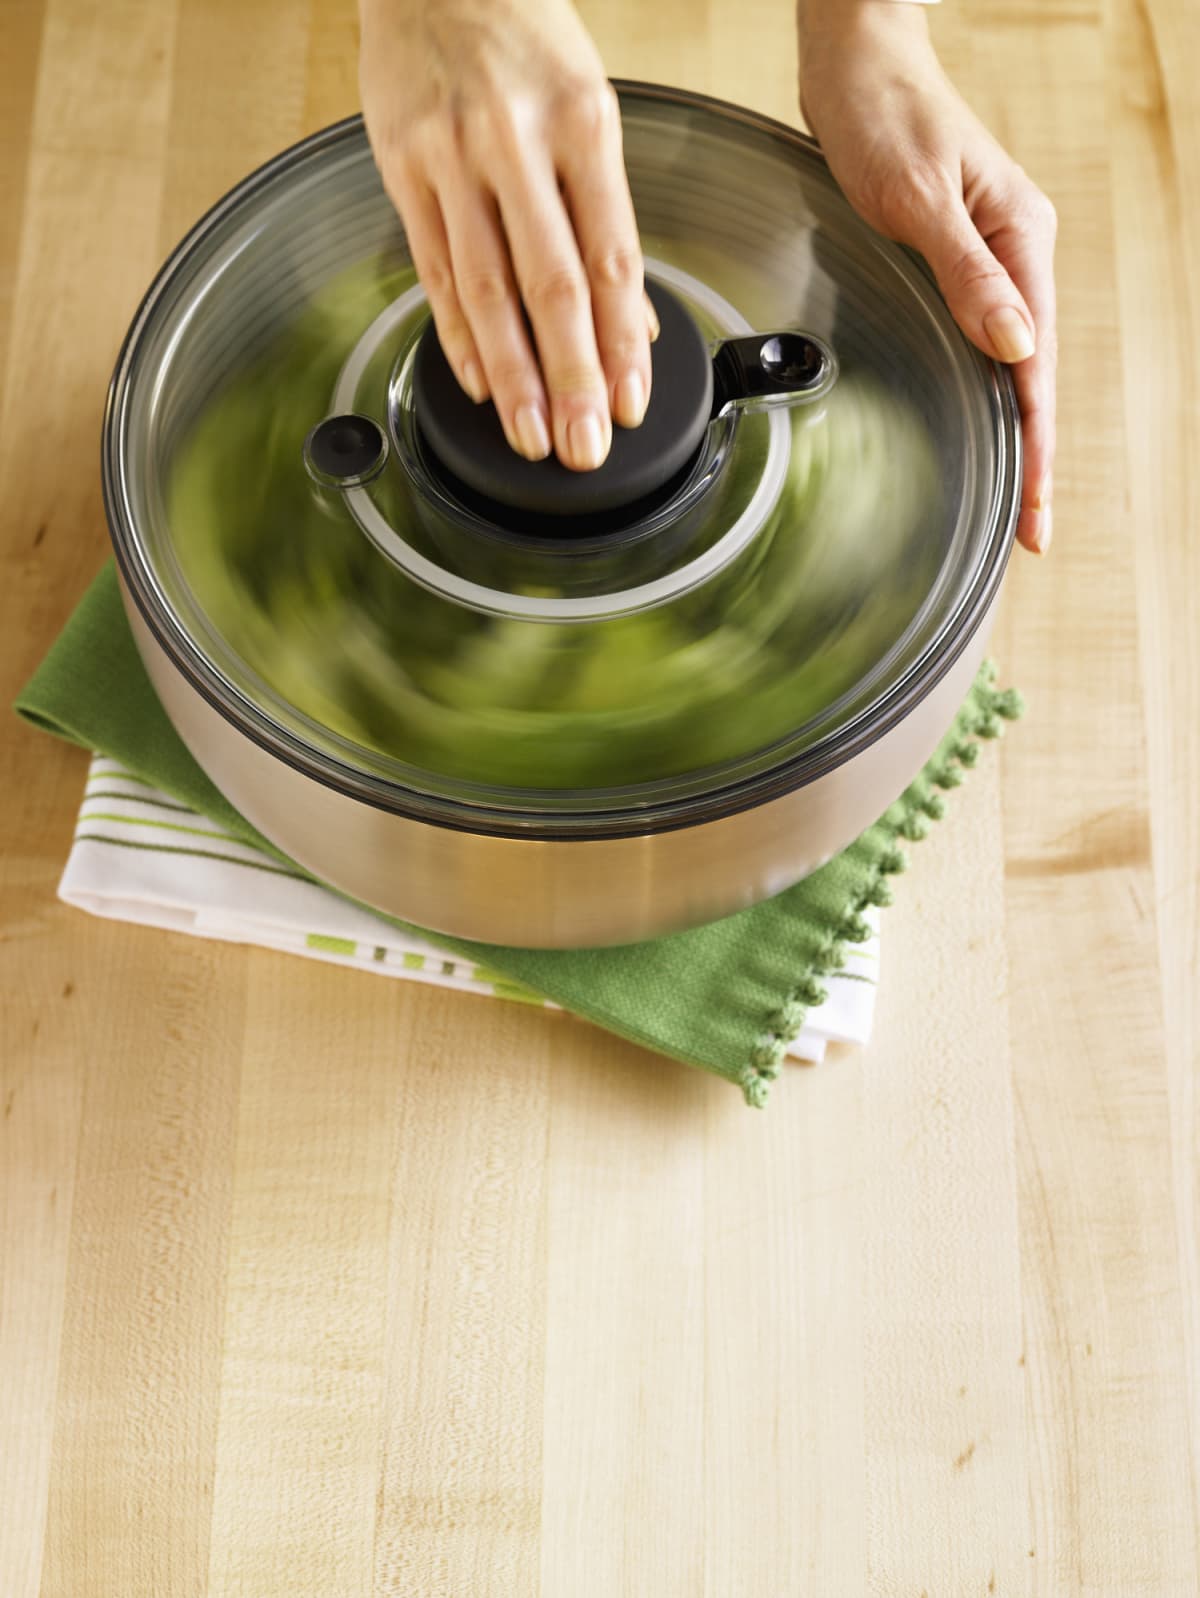 Hands using a salad spinner